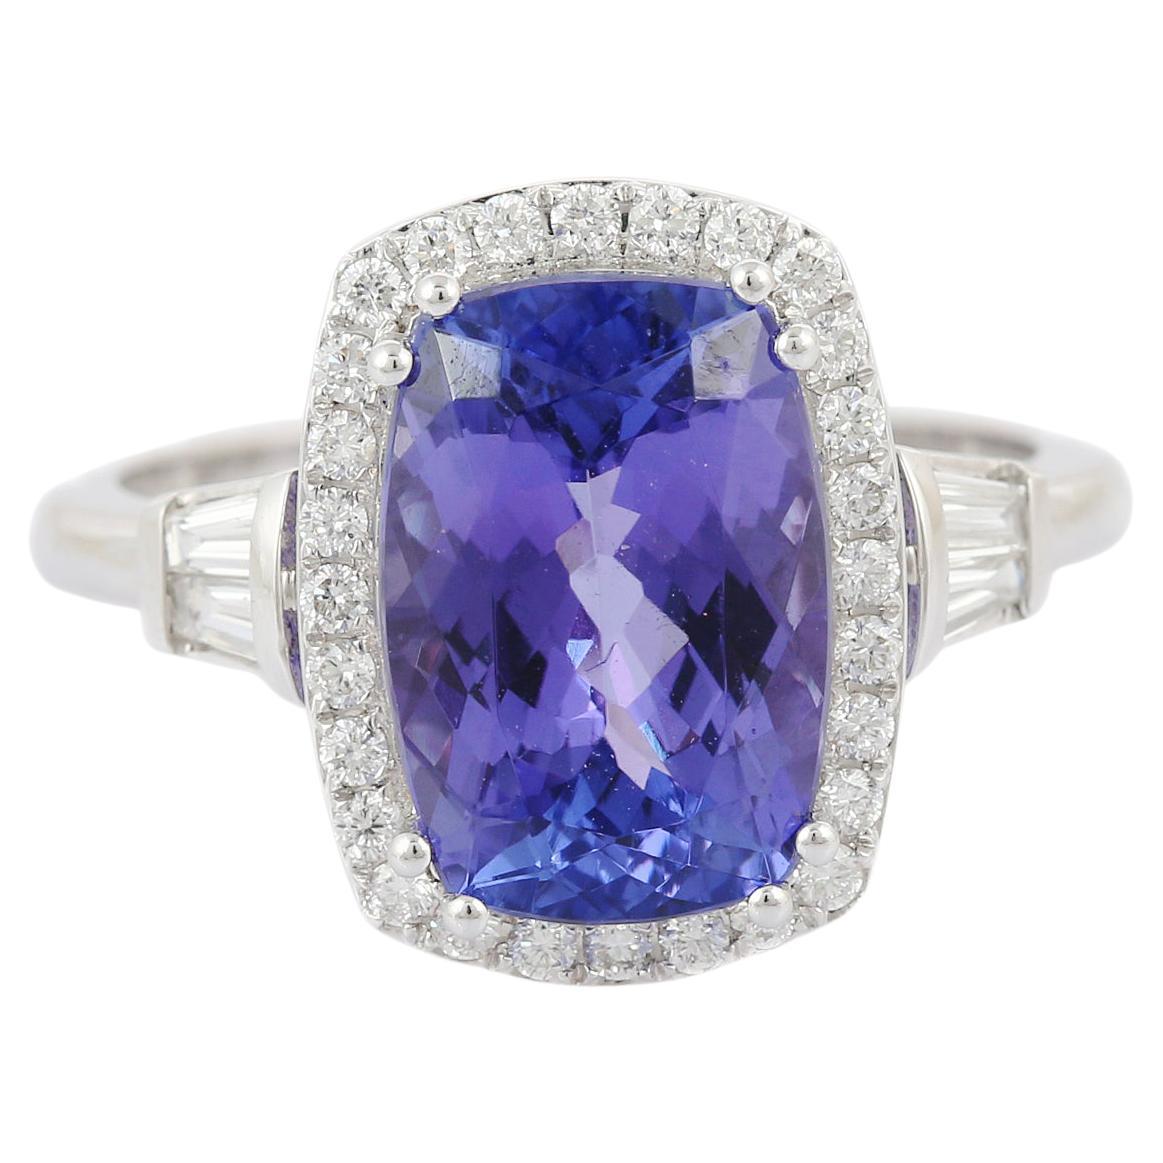 Tanzanite with Diamonds in 18K White Gold Cocktail Ring